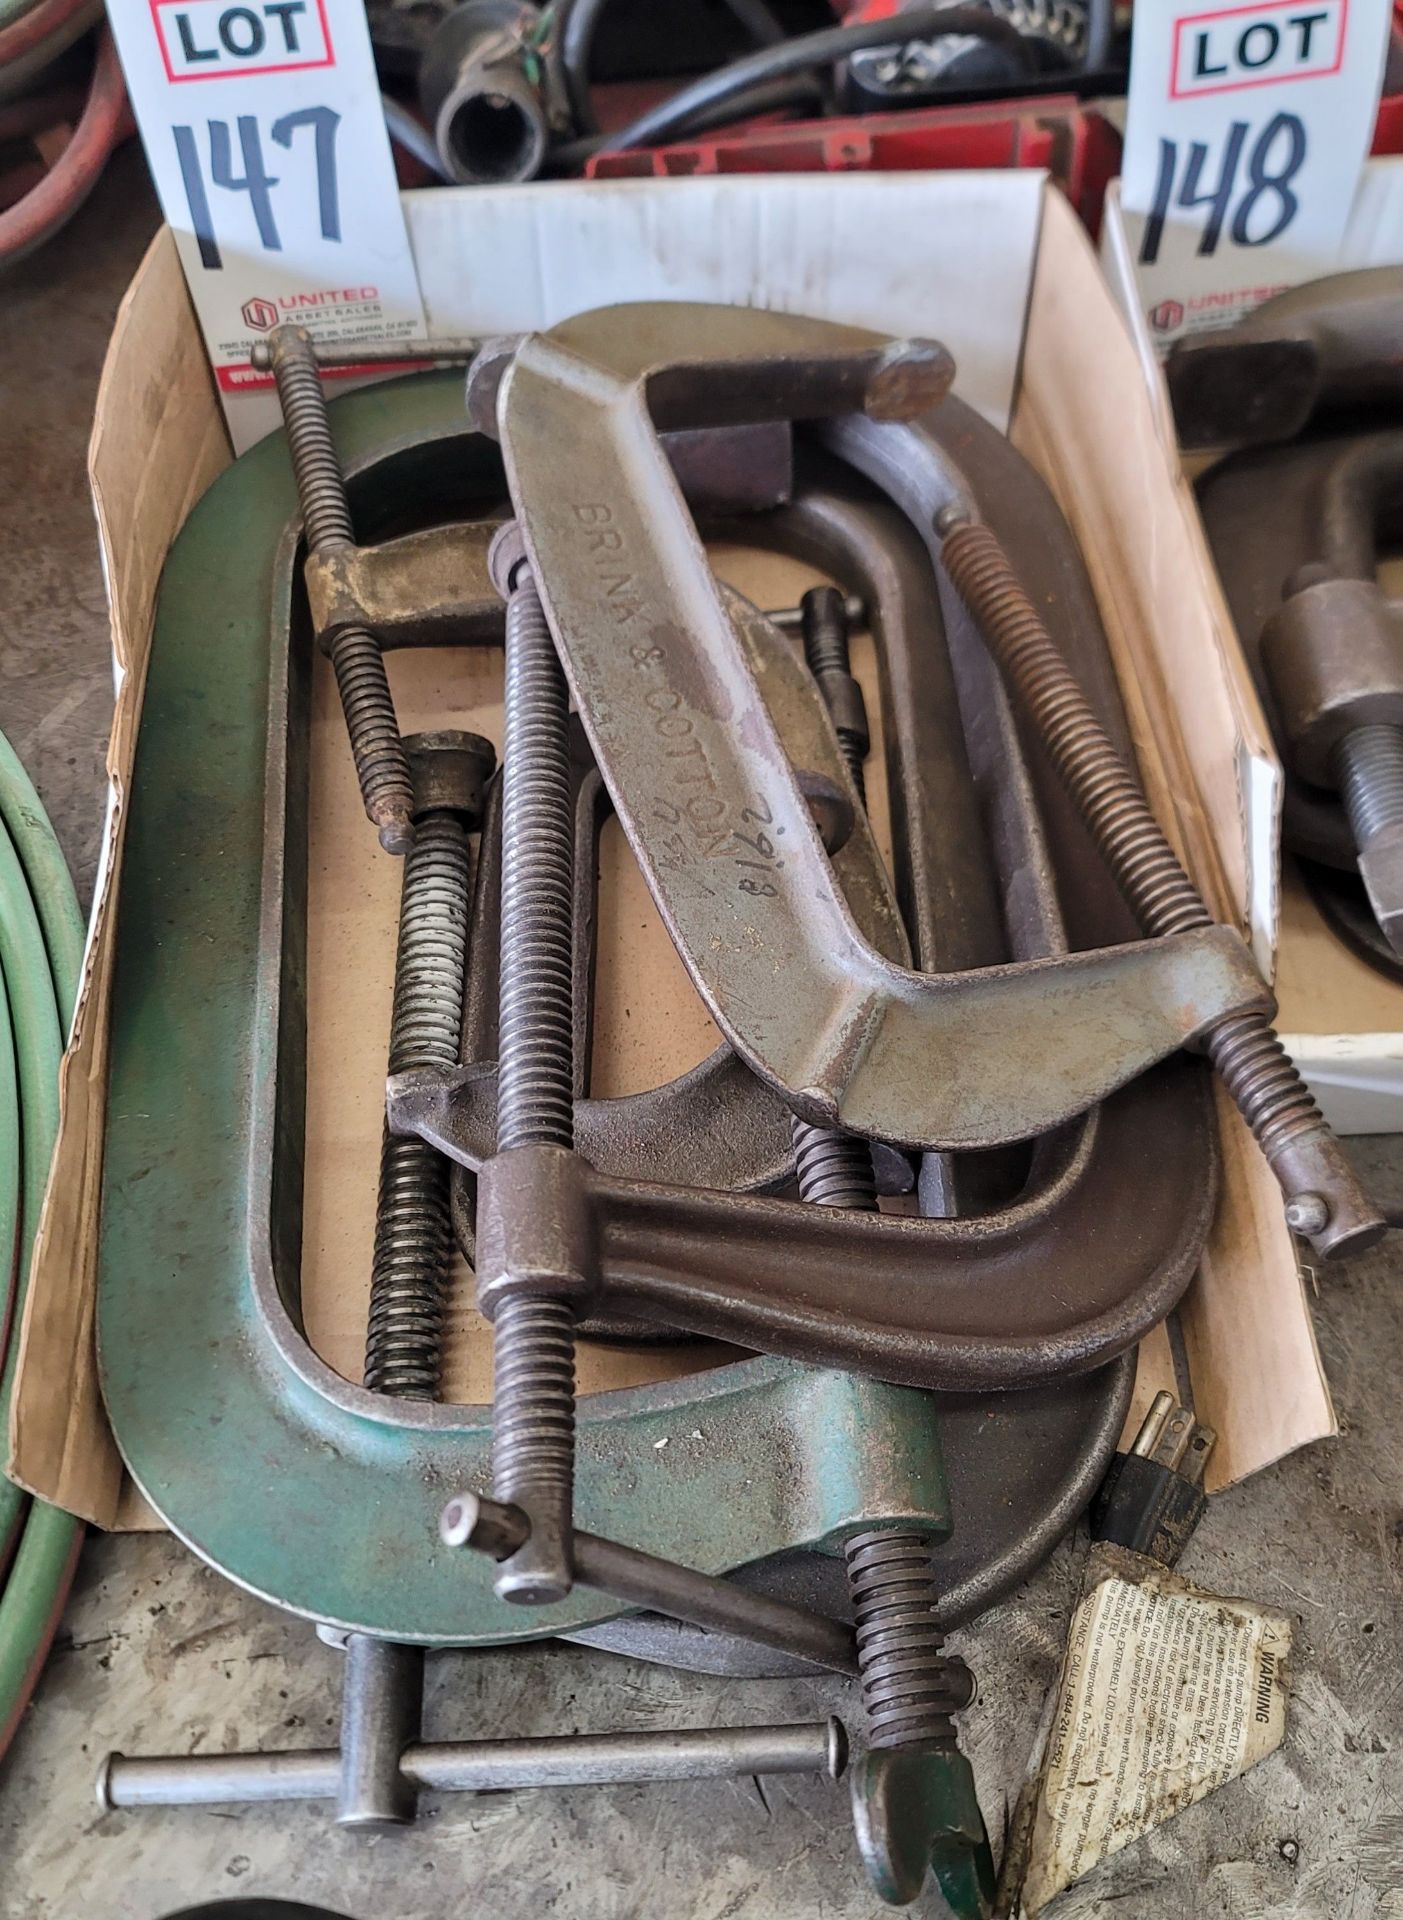 LOT - LARGE C-CLAMPS